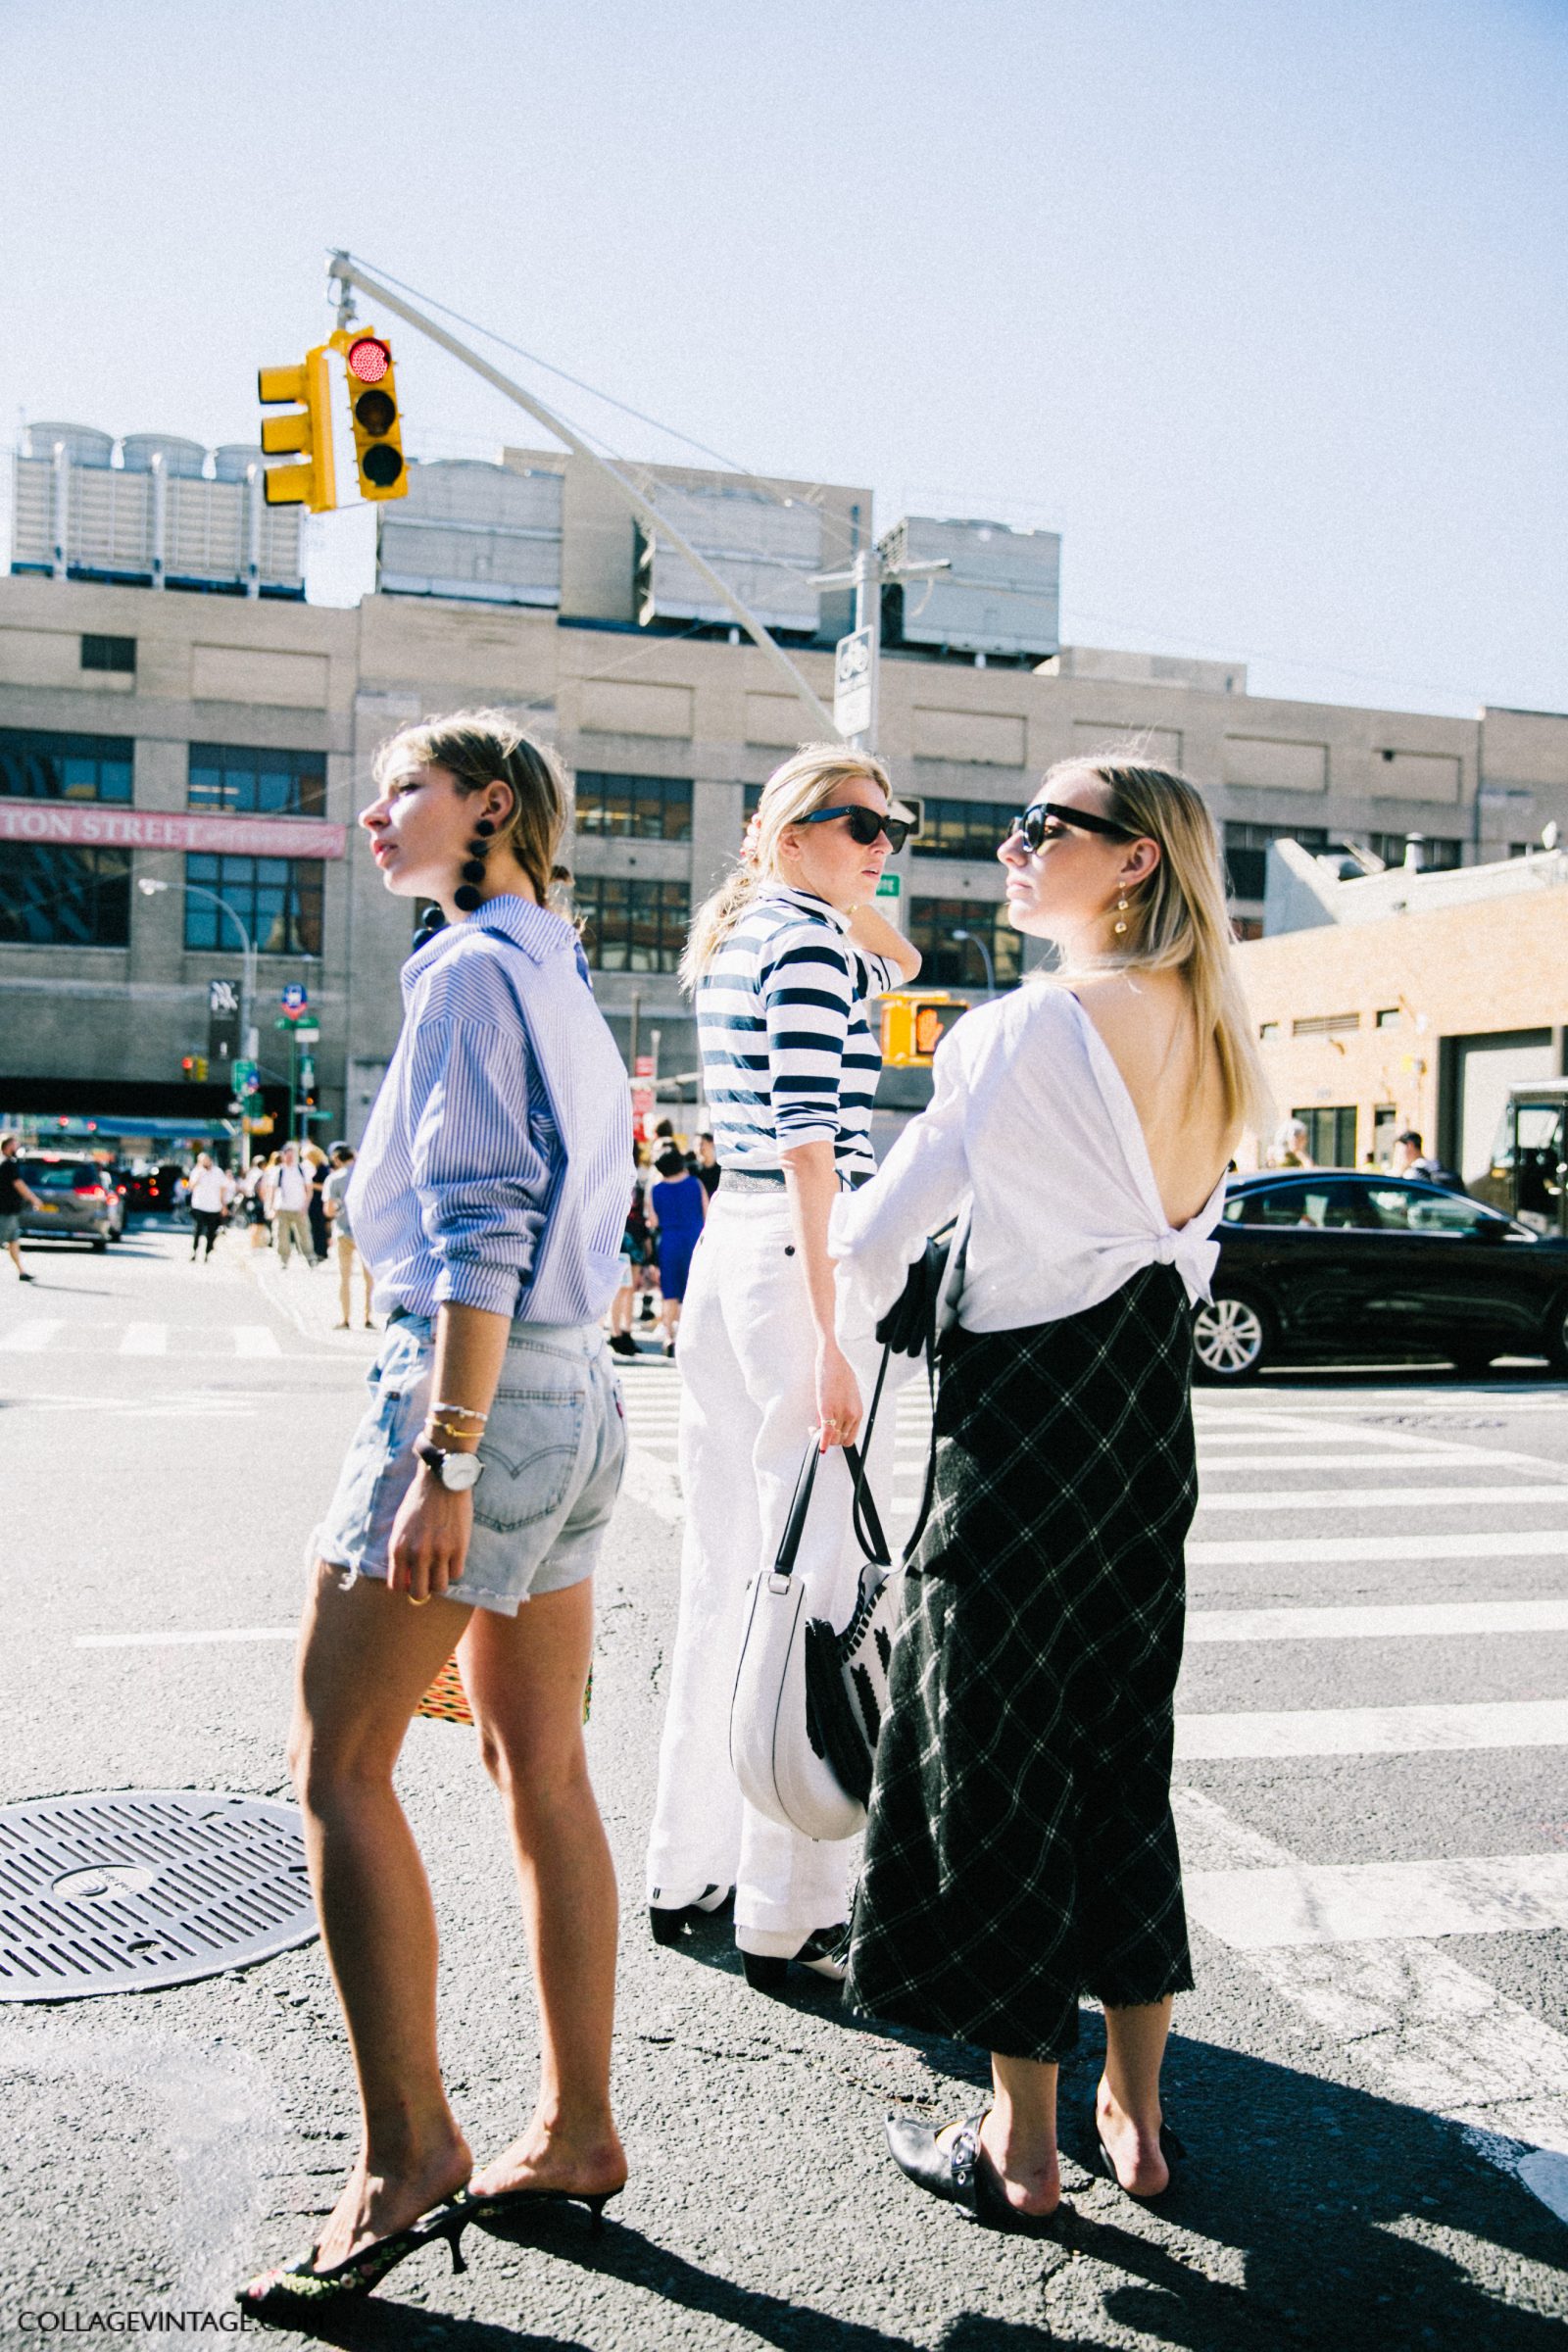 nyfw-new_york_fashion_week_ss17-street_style-outfits-collage_vintage-vintage-phillip_lim-the-row-proenza_schouler-rossie_aussolin-407